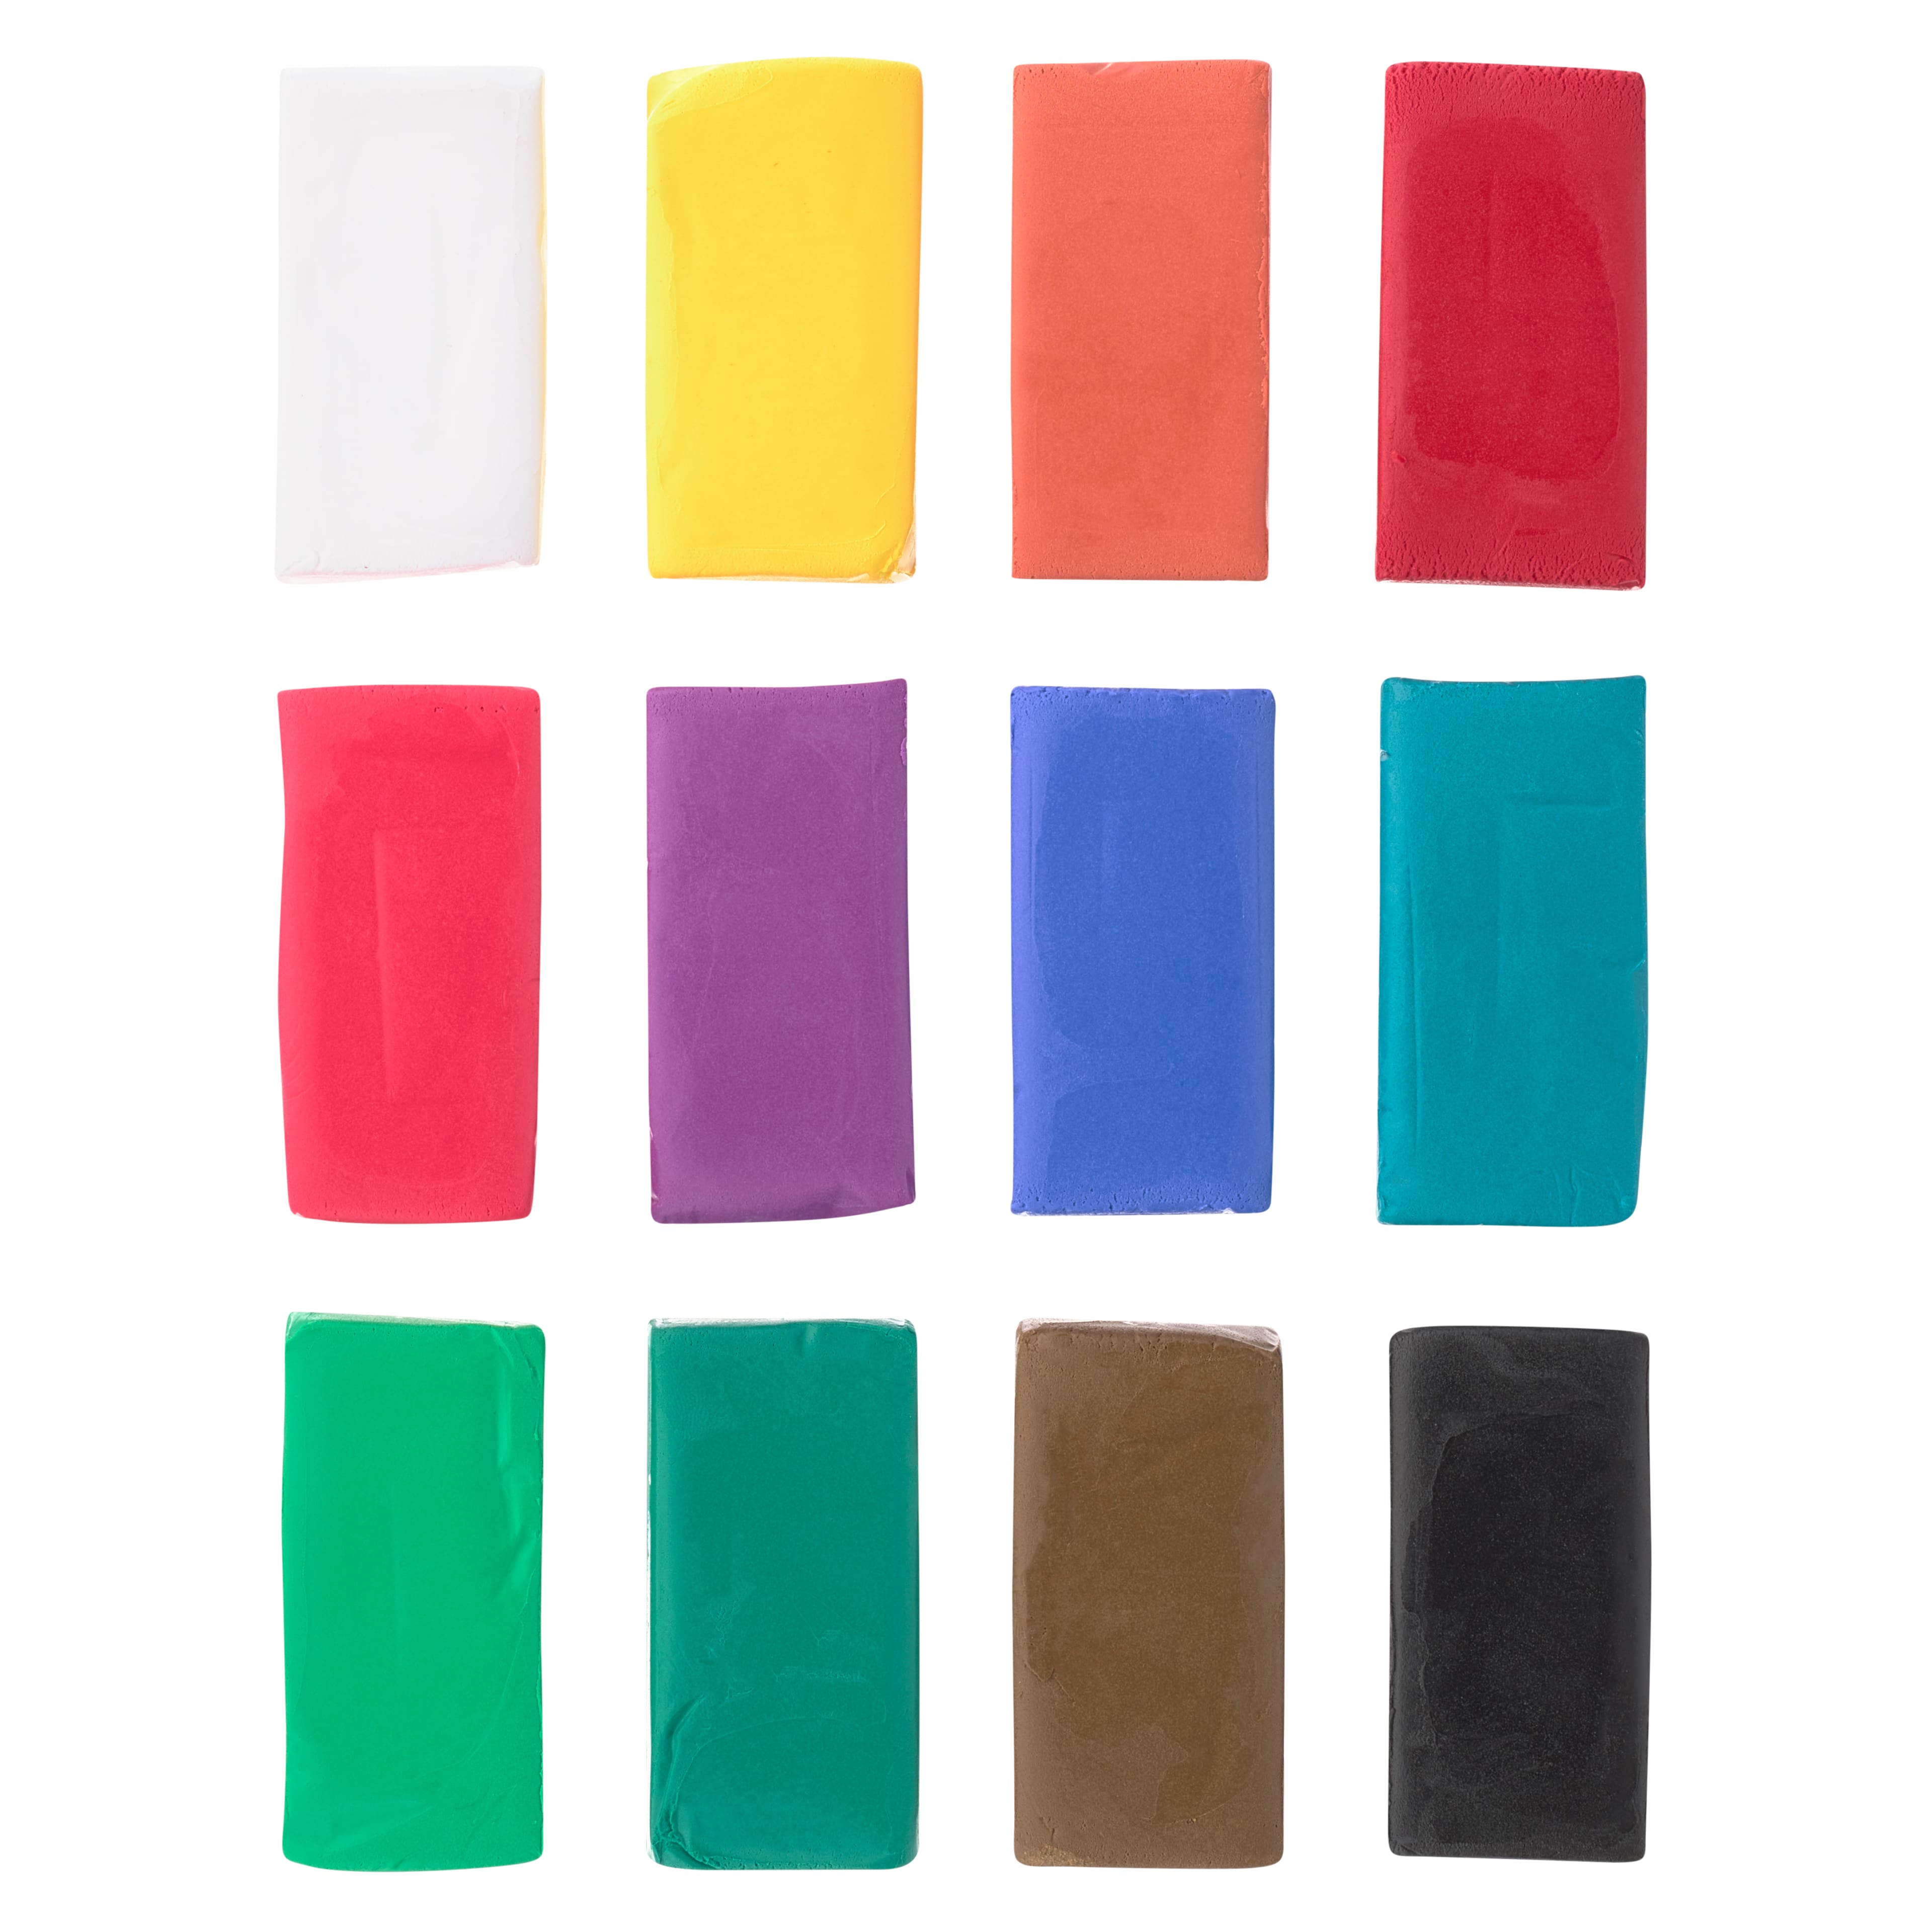 12 Color Suede Dye Assortment Kit - Pick Your Own Colors